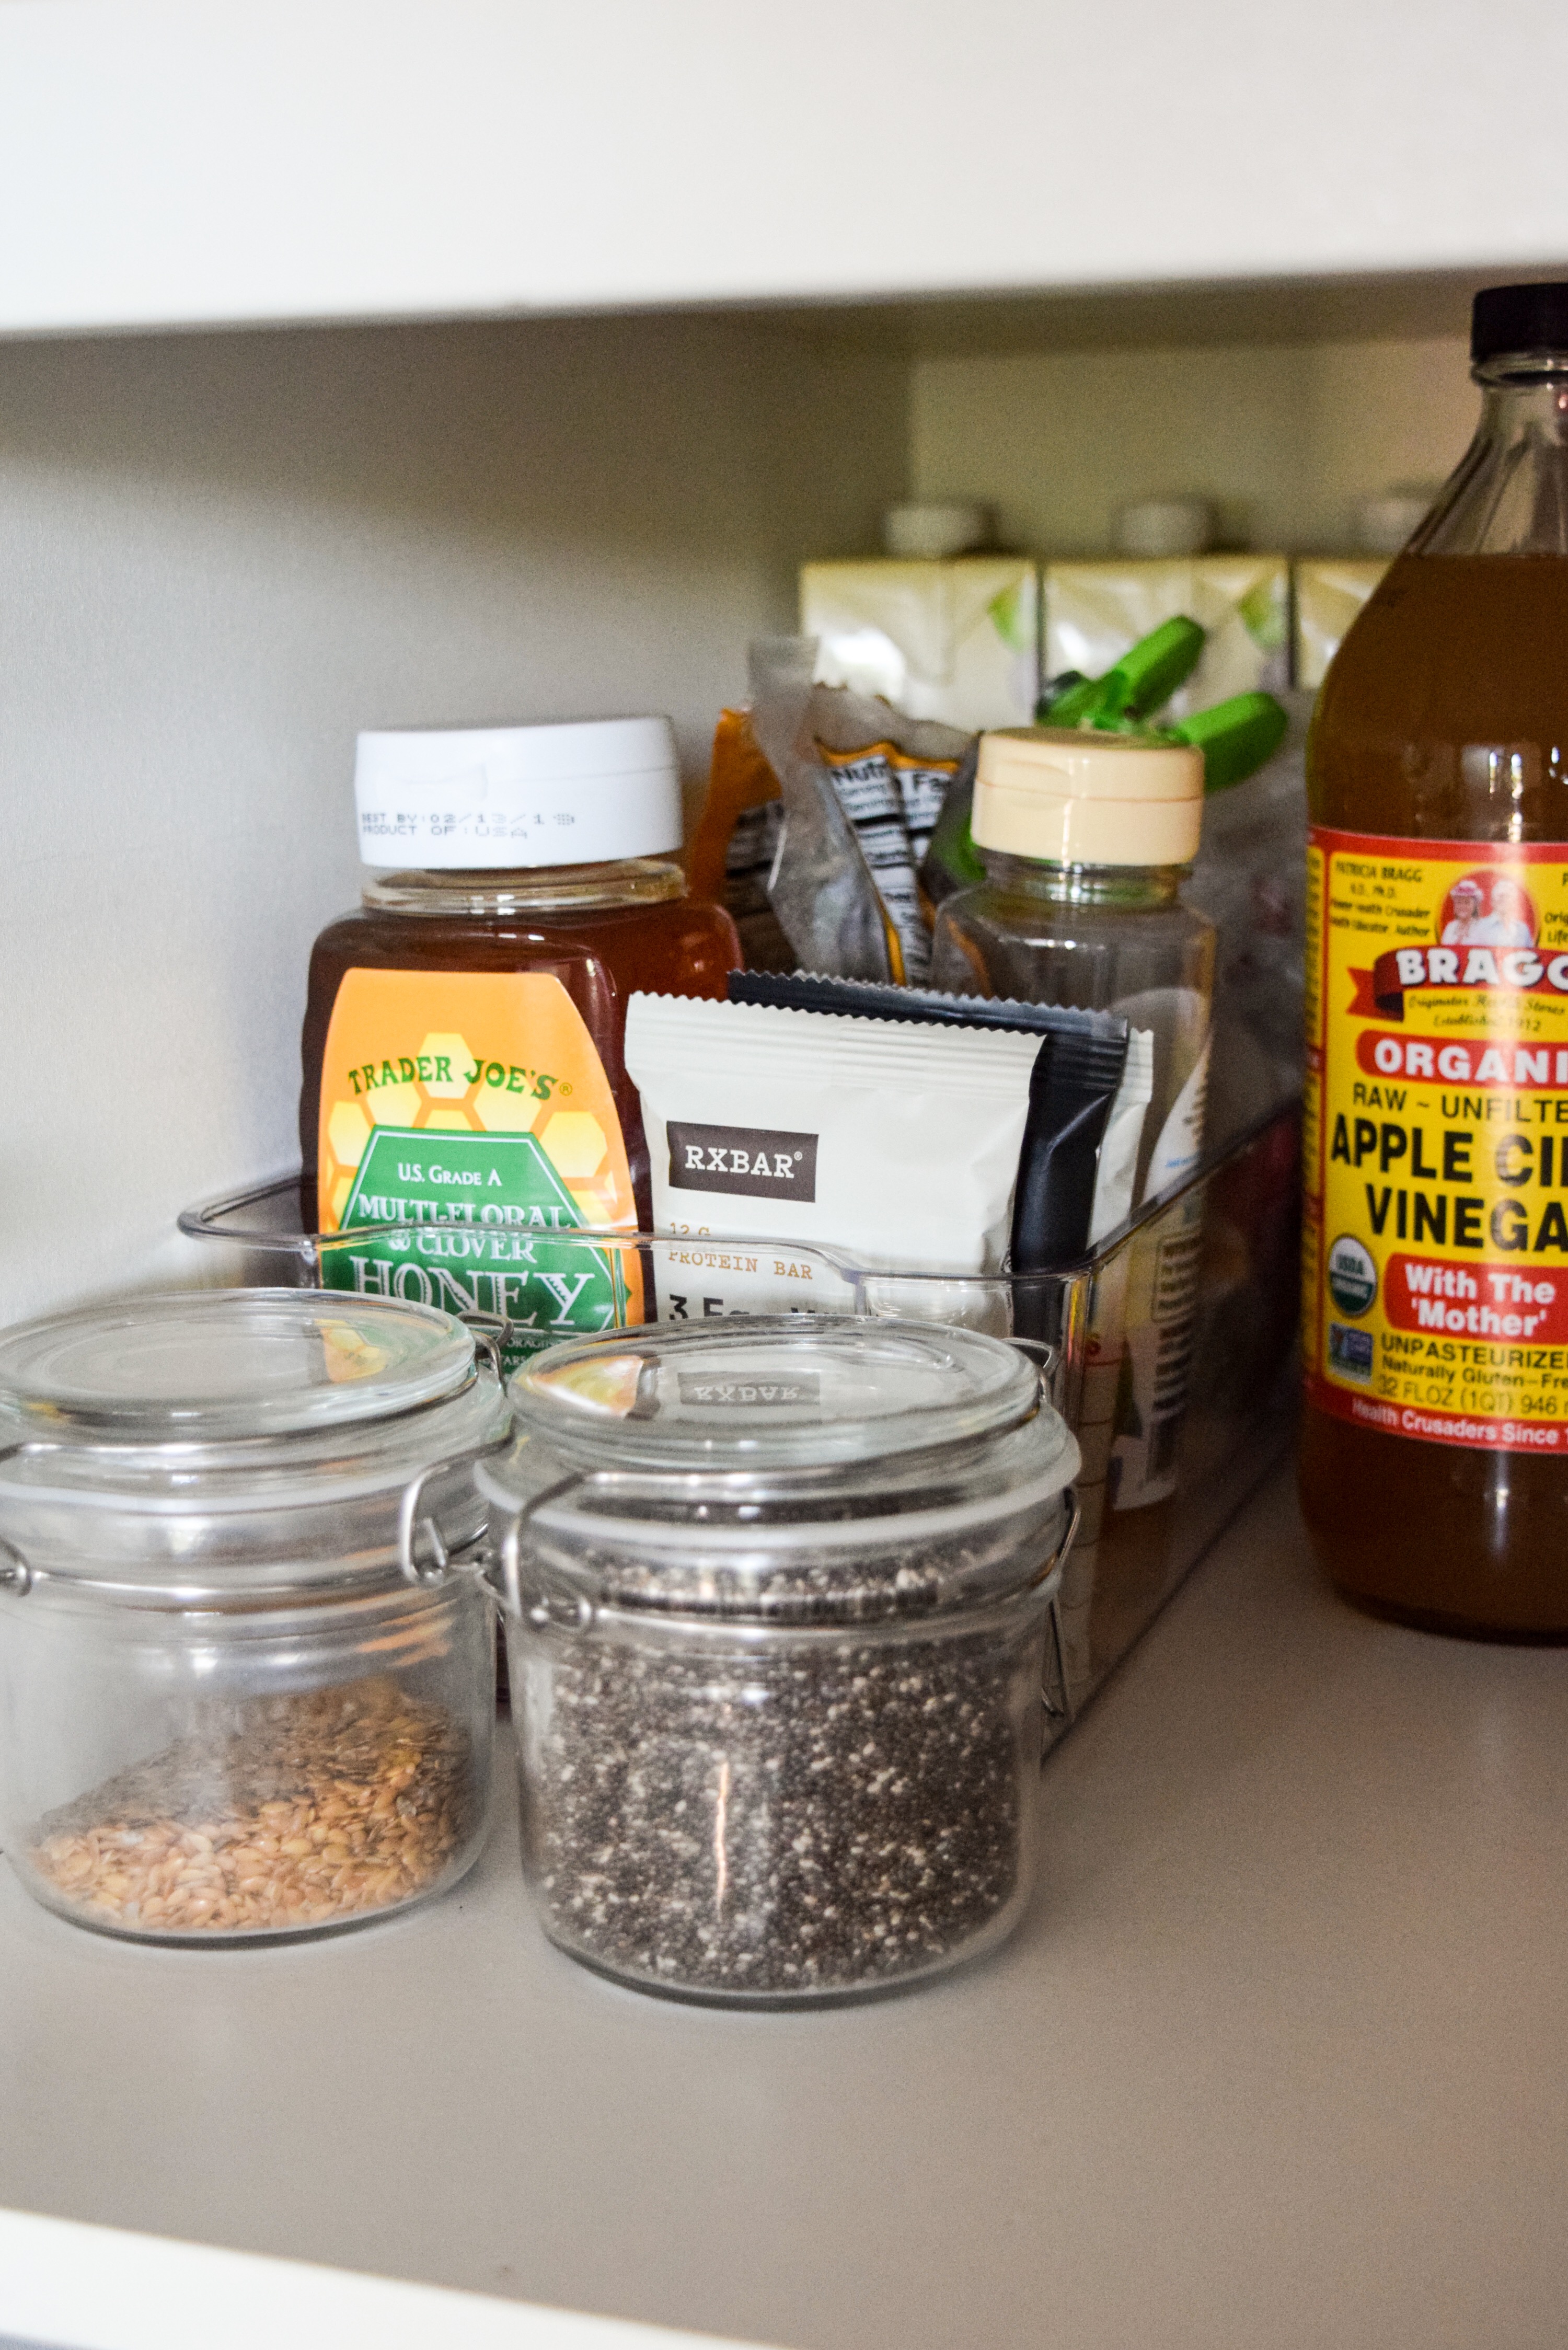 3 Smart Pantry Solutions to Make the Most of Your Space - Diplomat